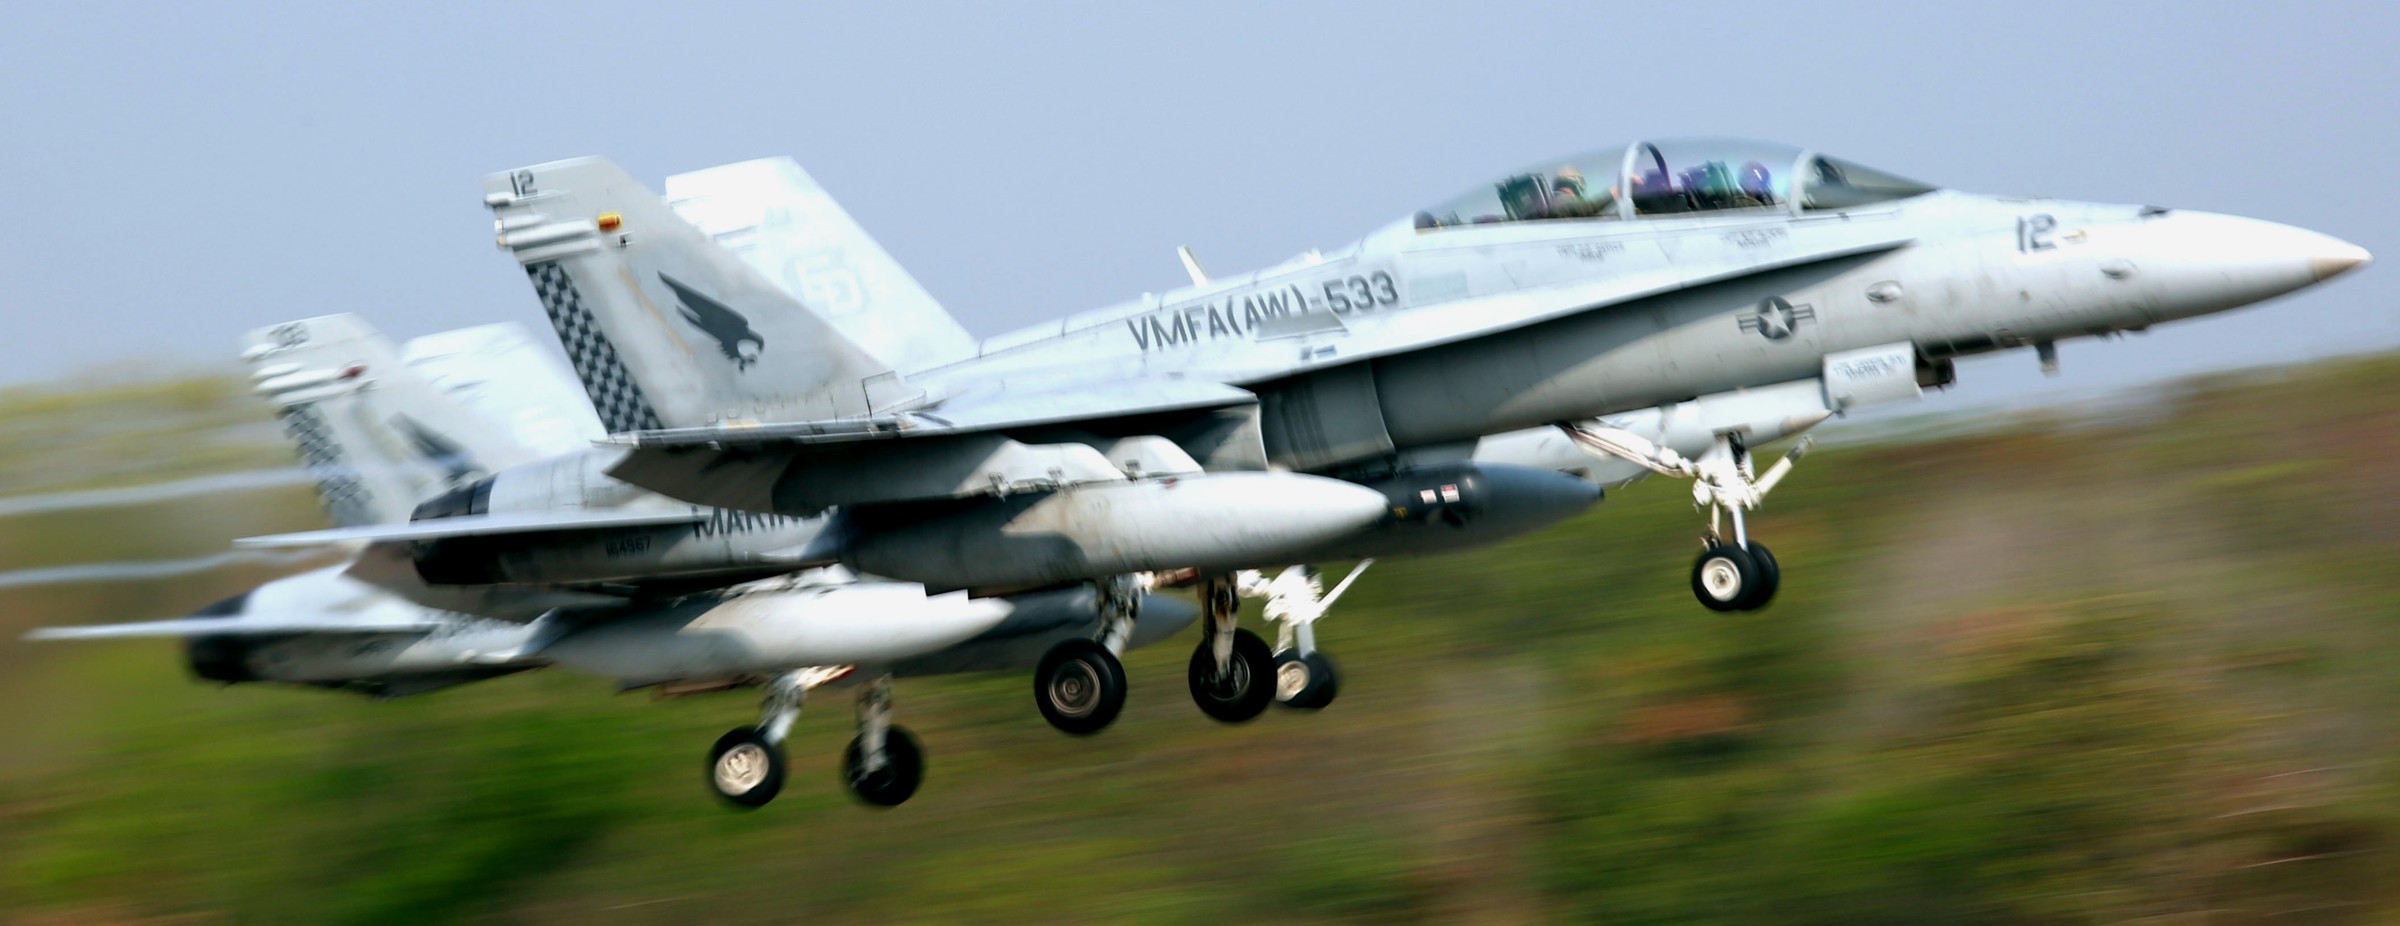 vmfa(aw)-533 hawks marine fighter attack squadron usmc f/a-18d hornet 29 exercise cobra gold